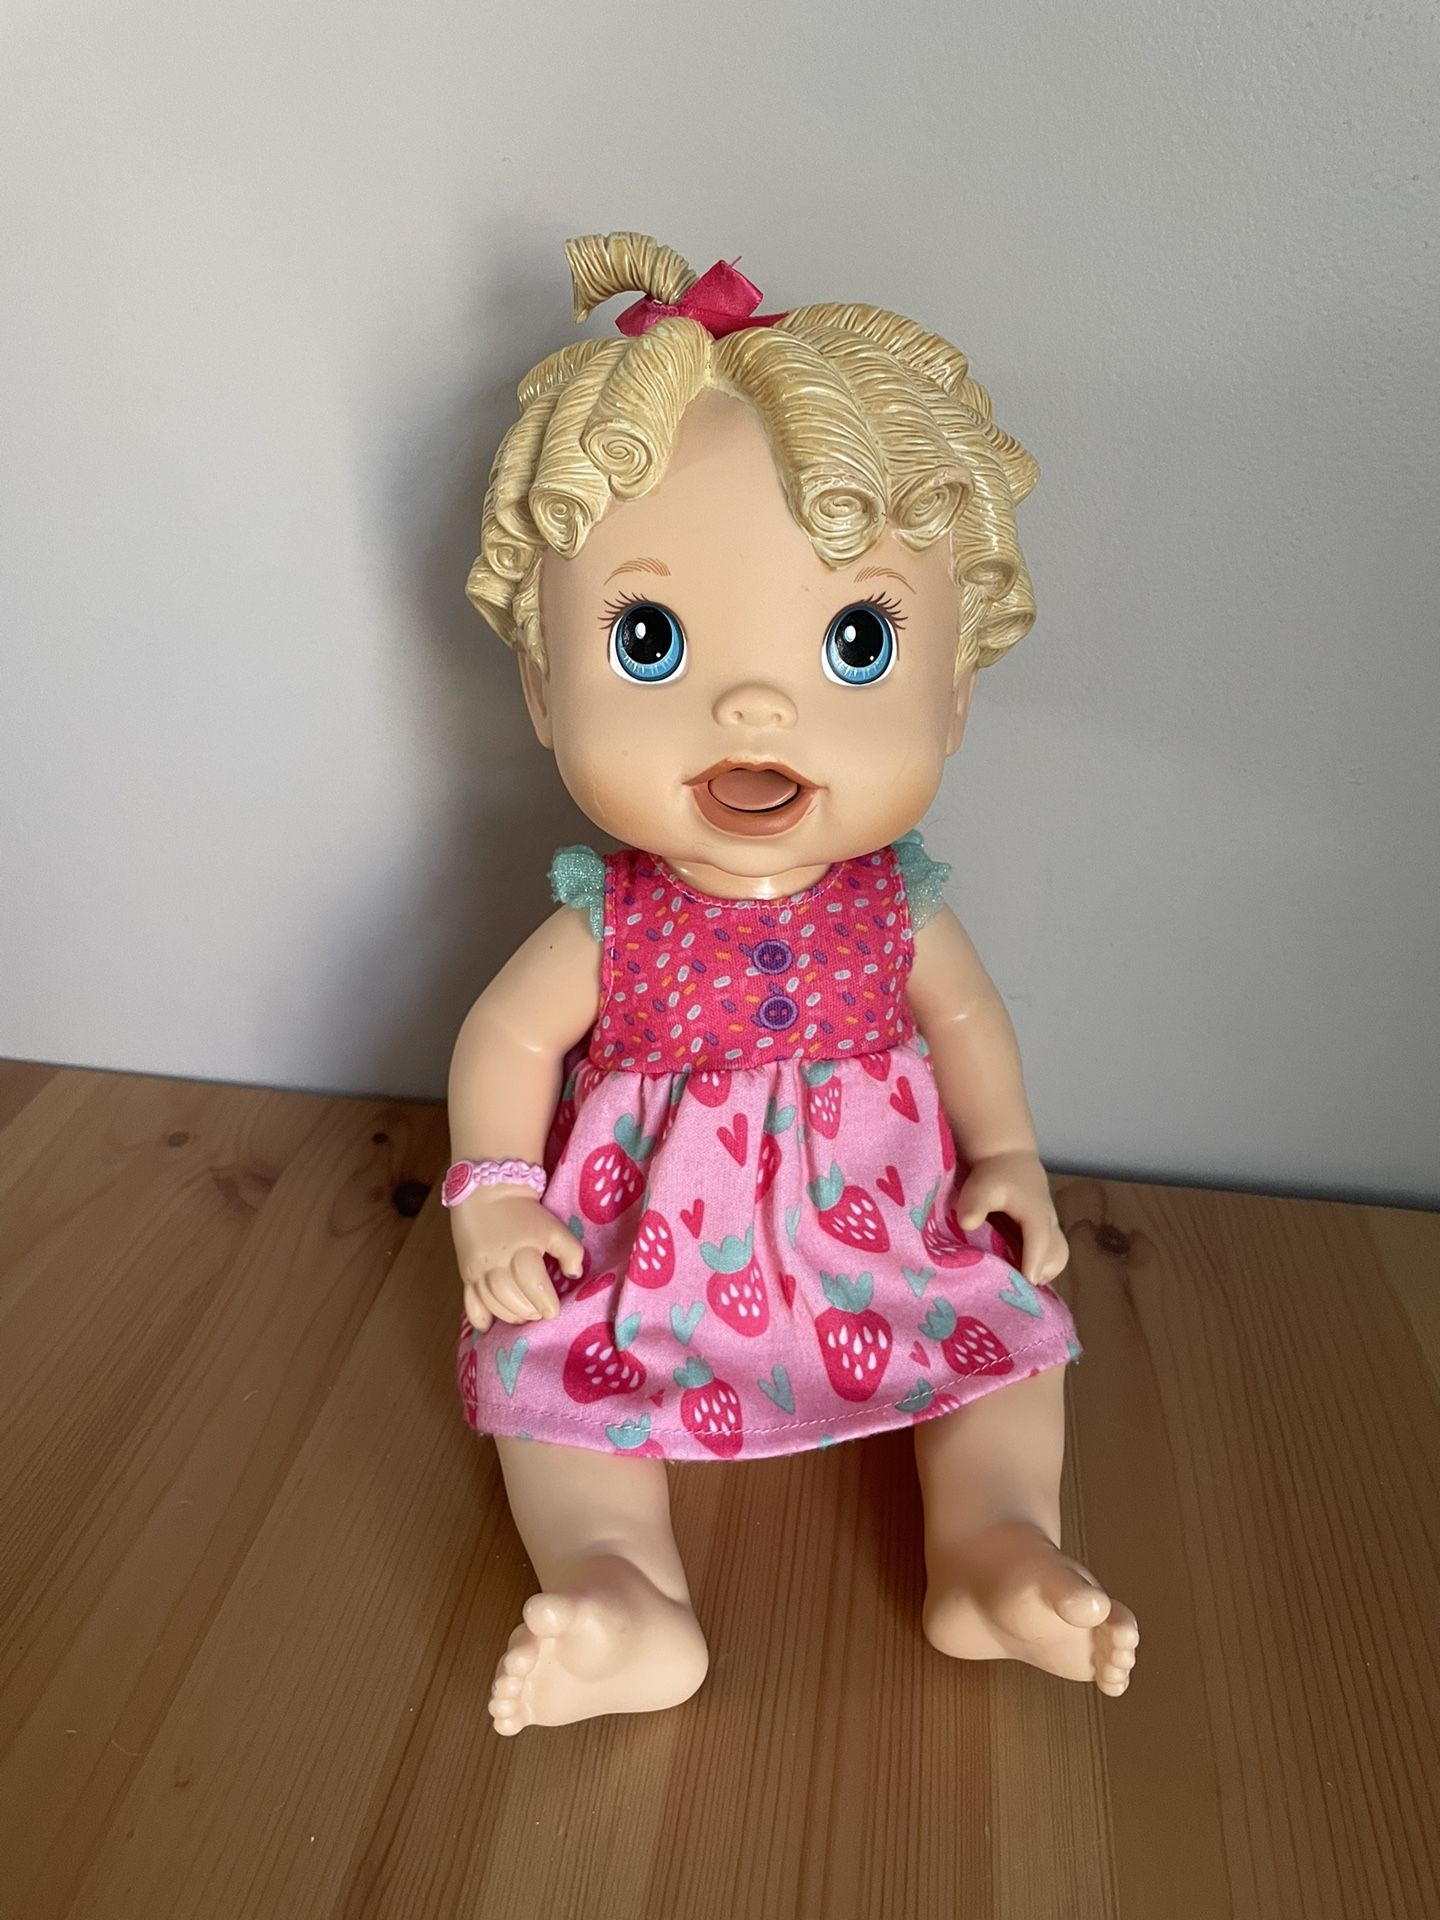 Baby Alive Doll Hasbro Talking Molded Blonde Curls Hair Tested Works